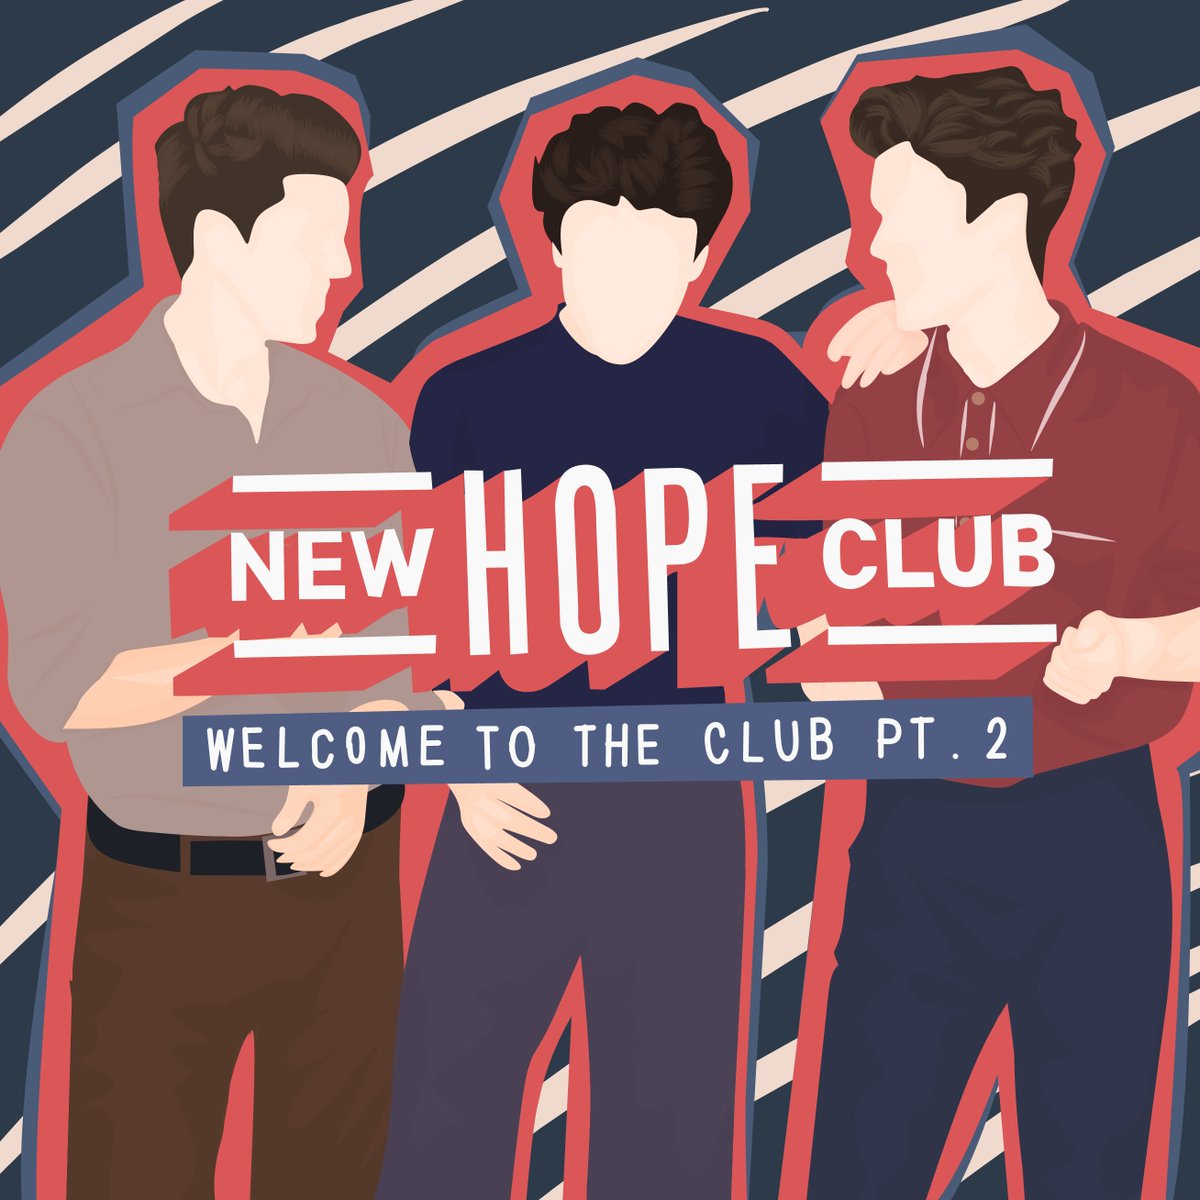 New Hope Club. I made it when I found 'Crazy' and start loving their songs